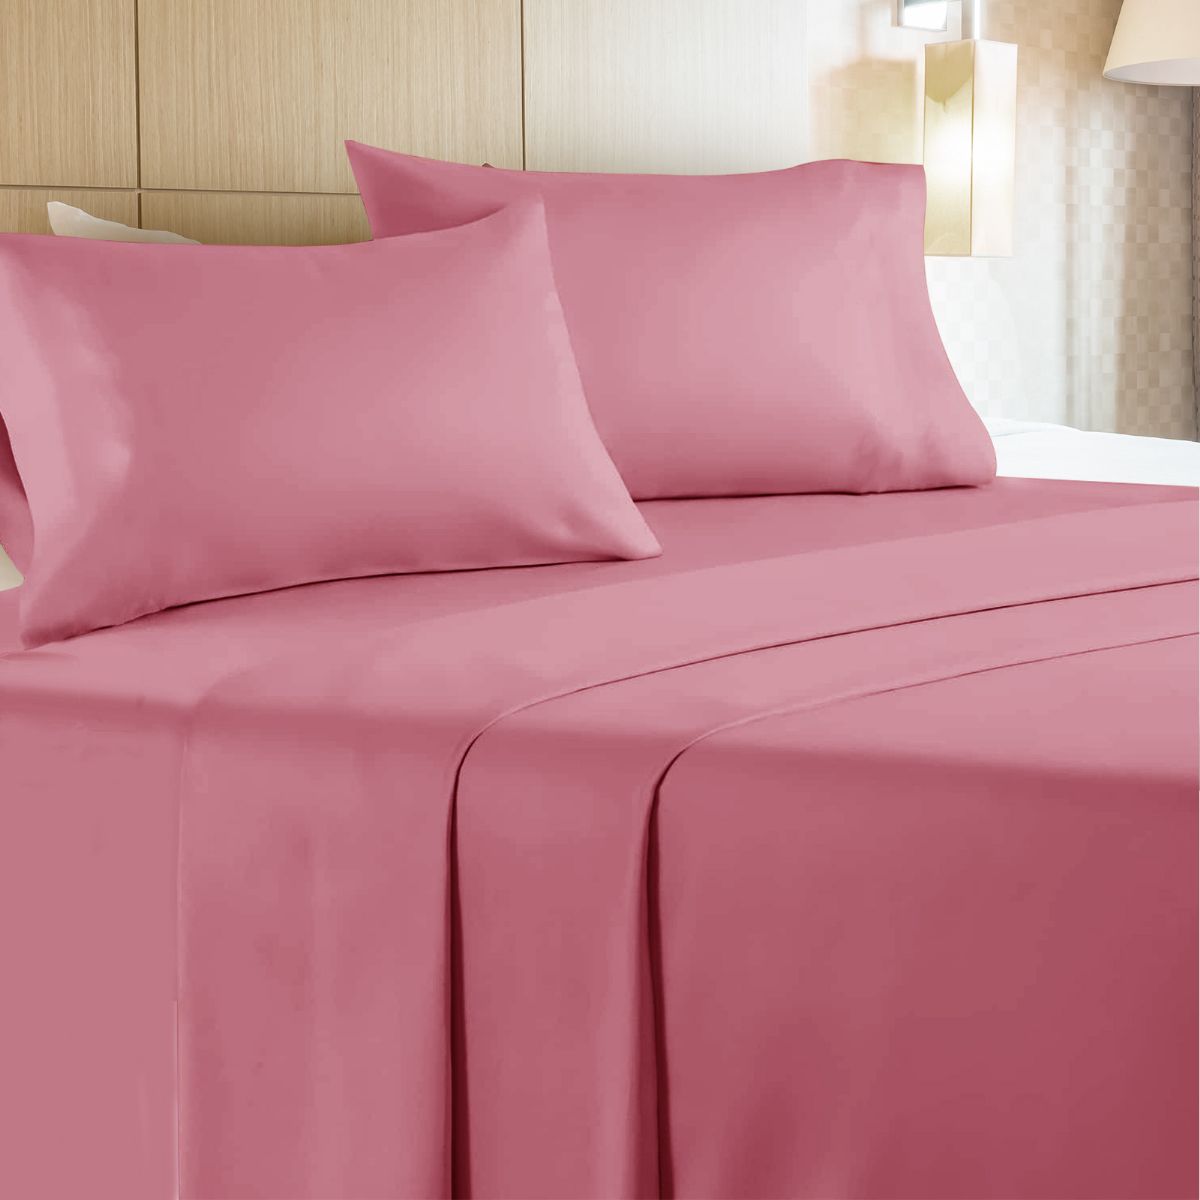 6 Sets of 4 Piece Microfiber Bed Sheet Set Twin Size In Maroon